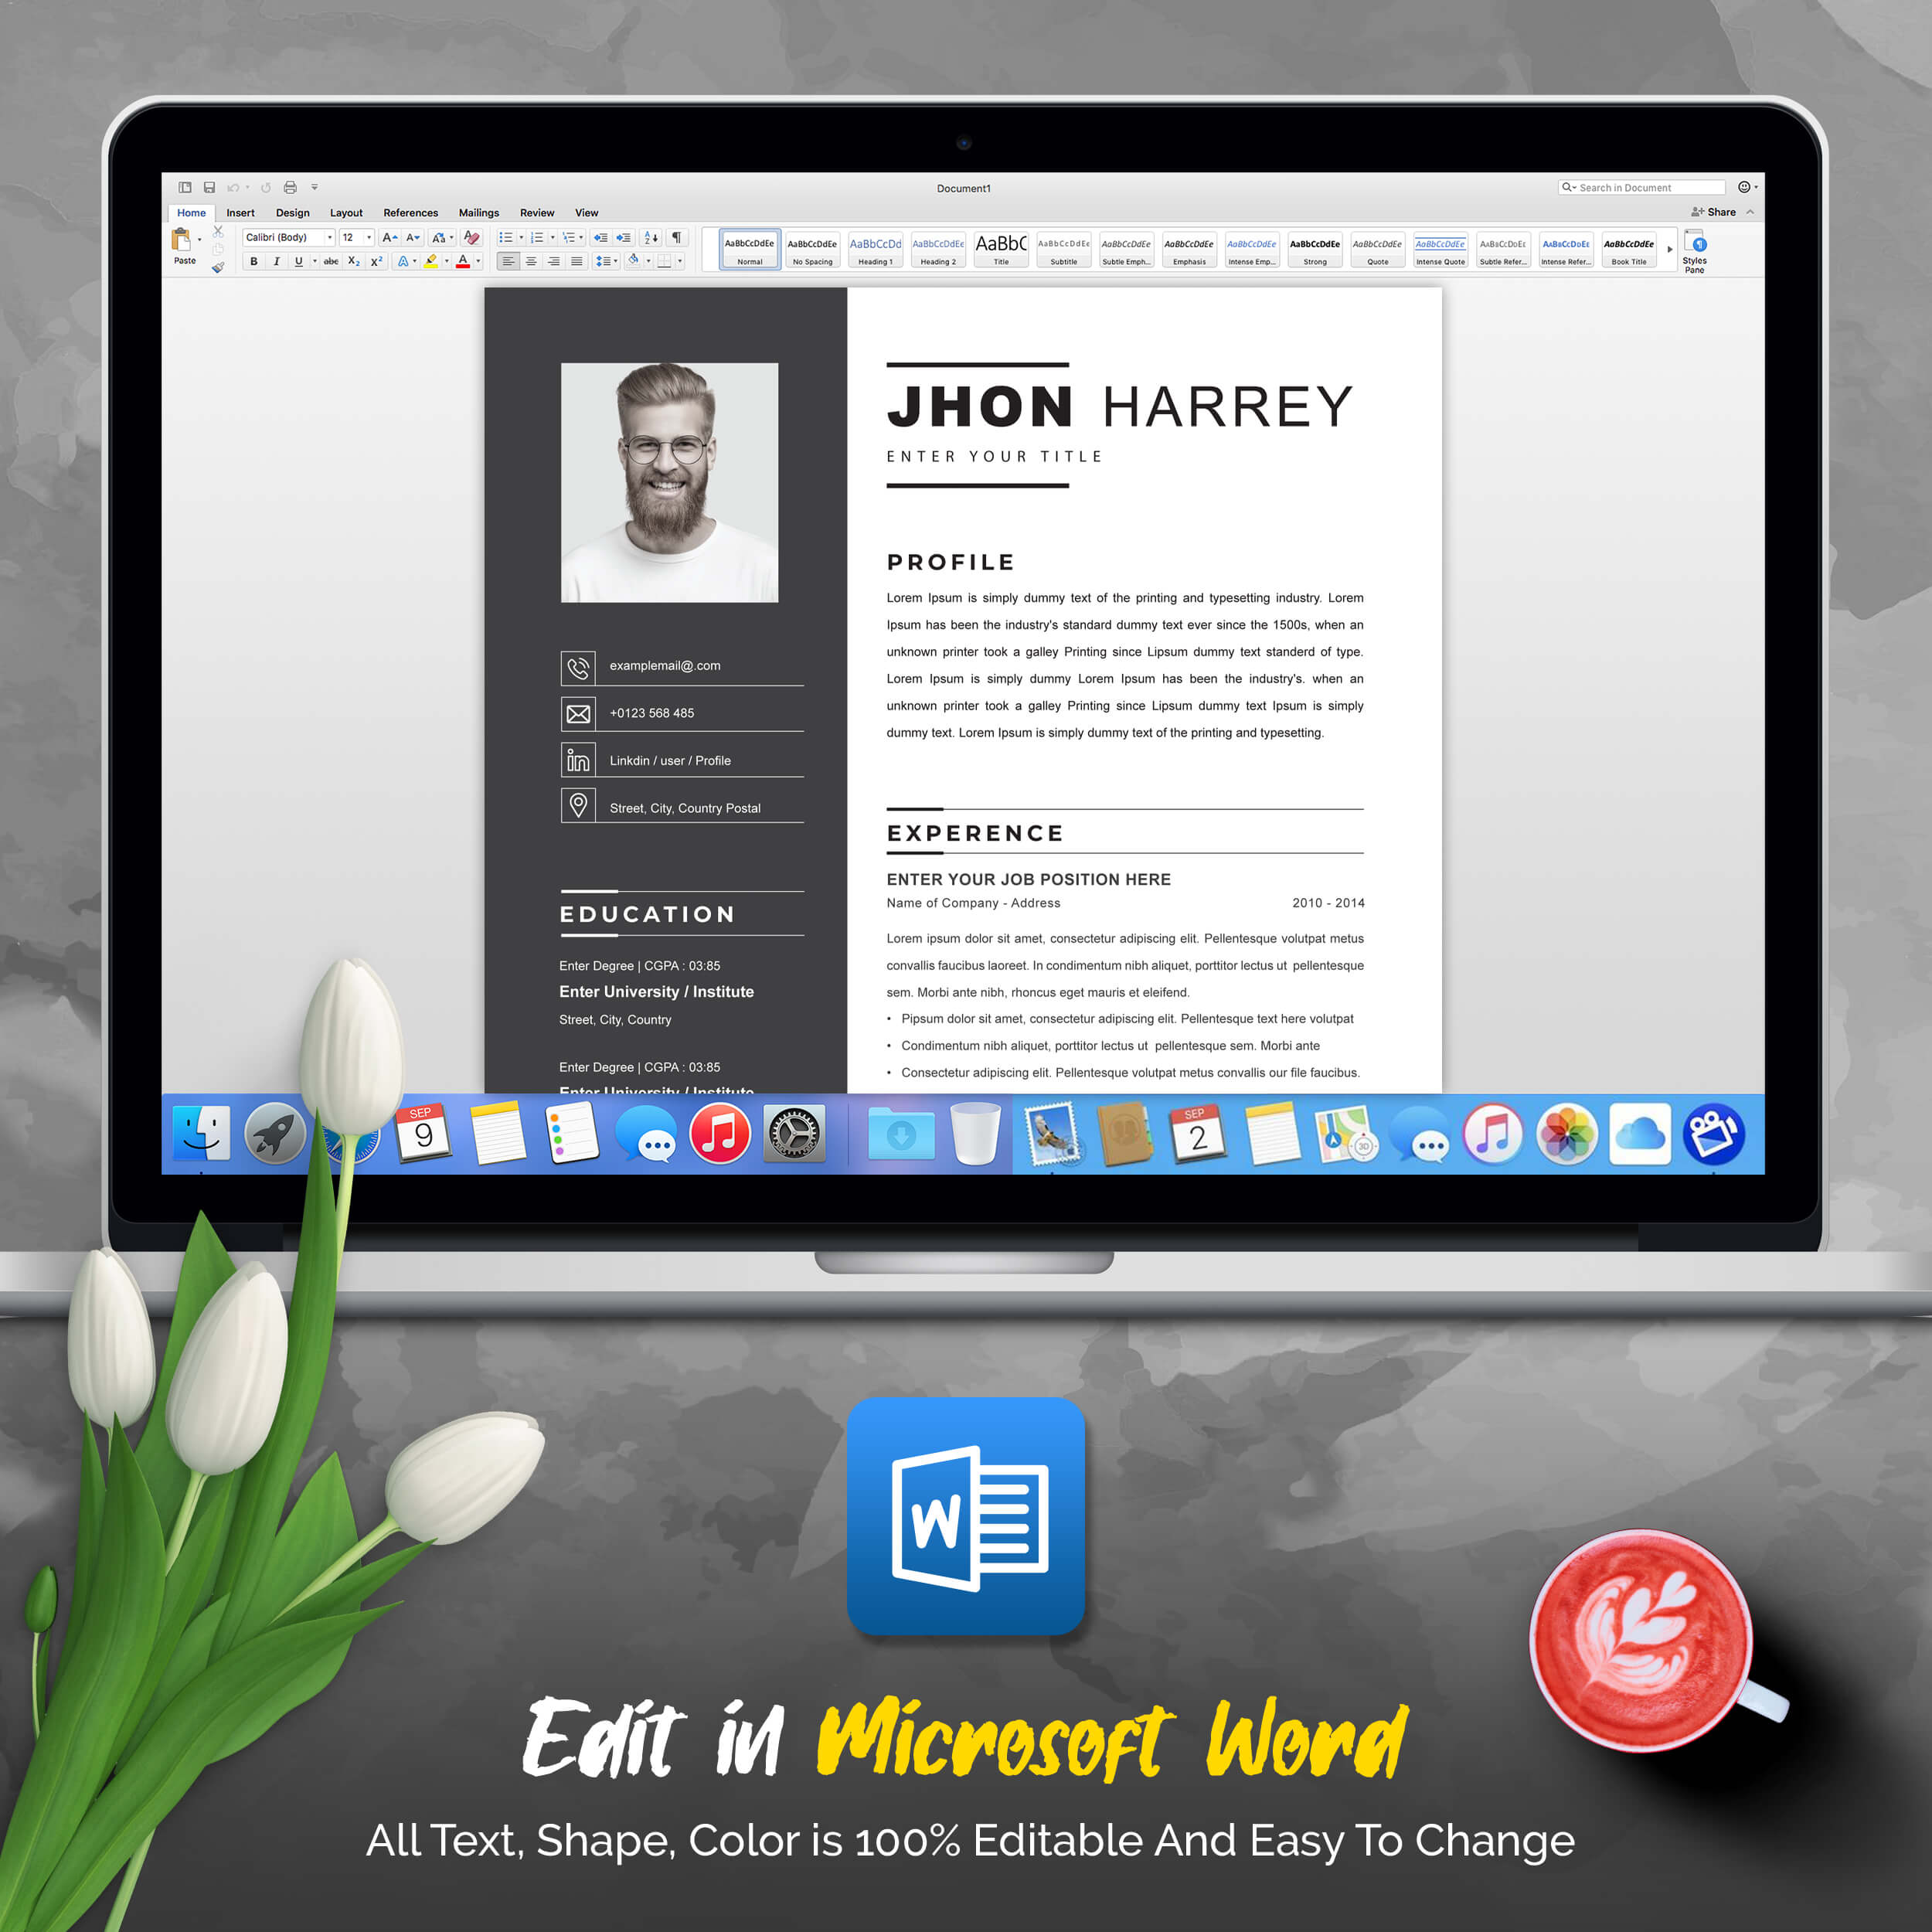 05 3 pages professional ms word aple pages eps photoshop psd resume cv design template design by resume inventor 565